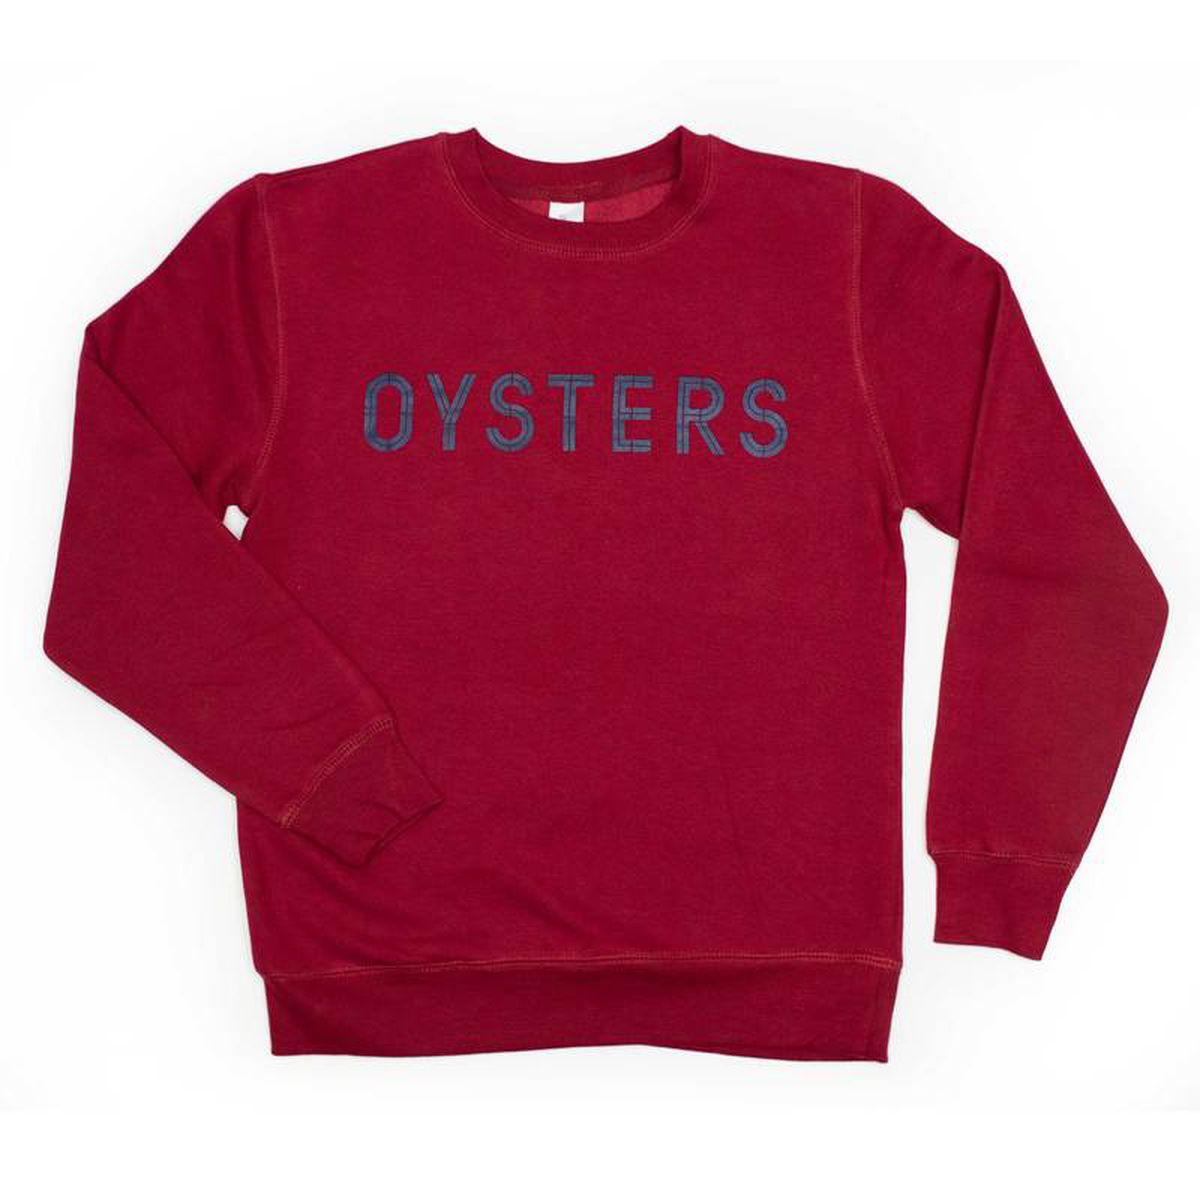 Burgundy crewneck sweatshirt with the word “oysters” written across the front in capital letters. Blueish-gray text.